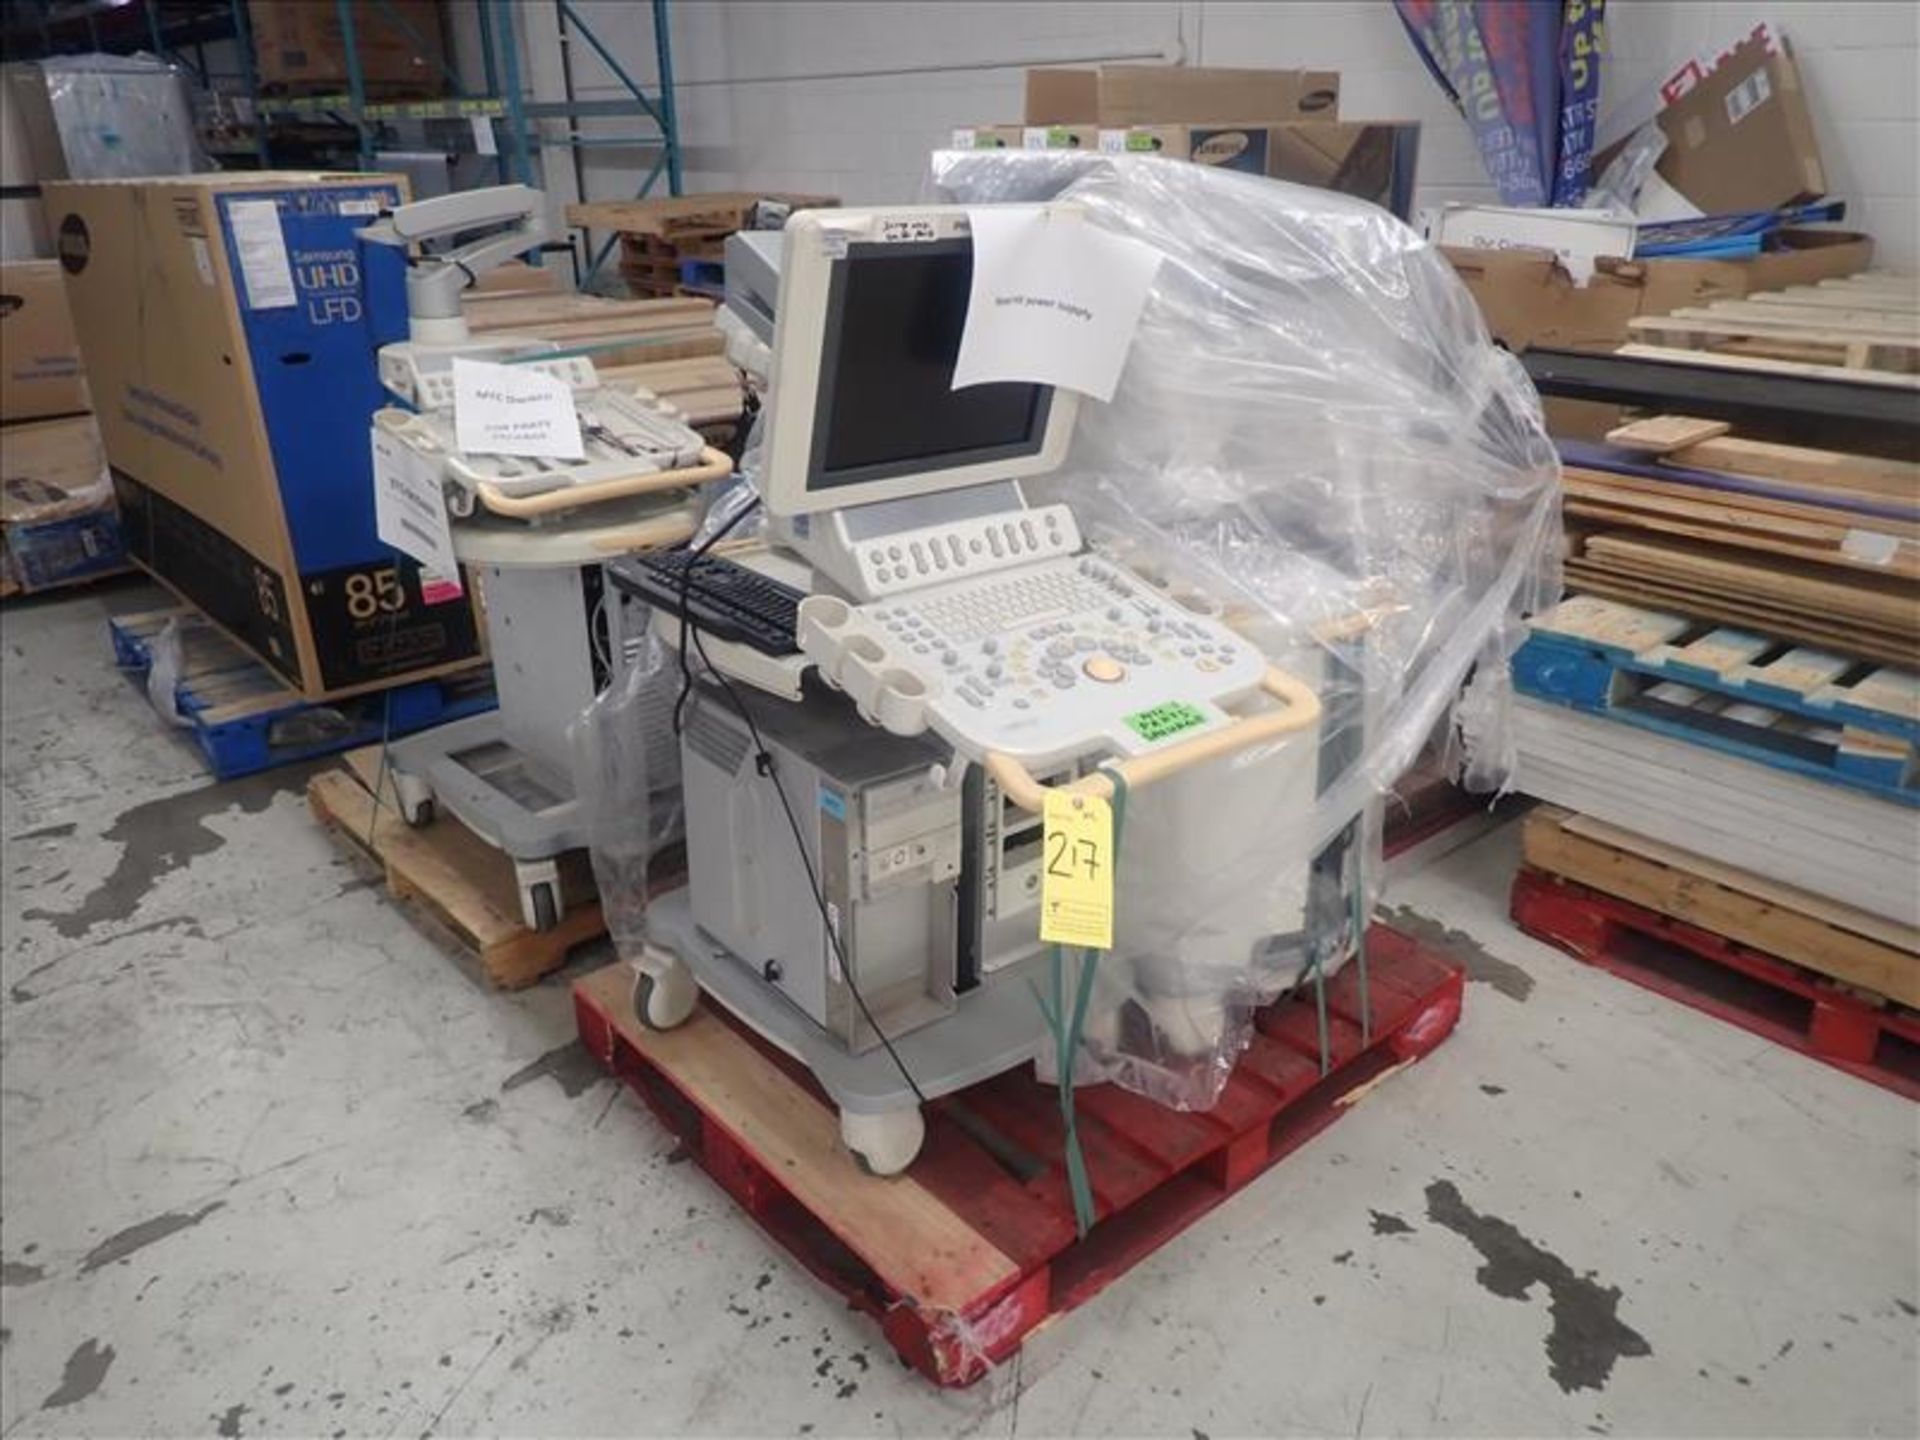 (4 partial) Phillips HDII ultrasound machines for salvage/parts